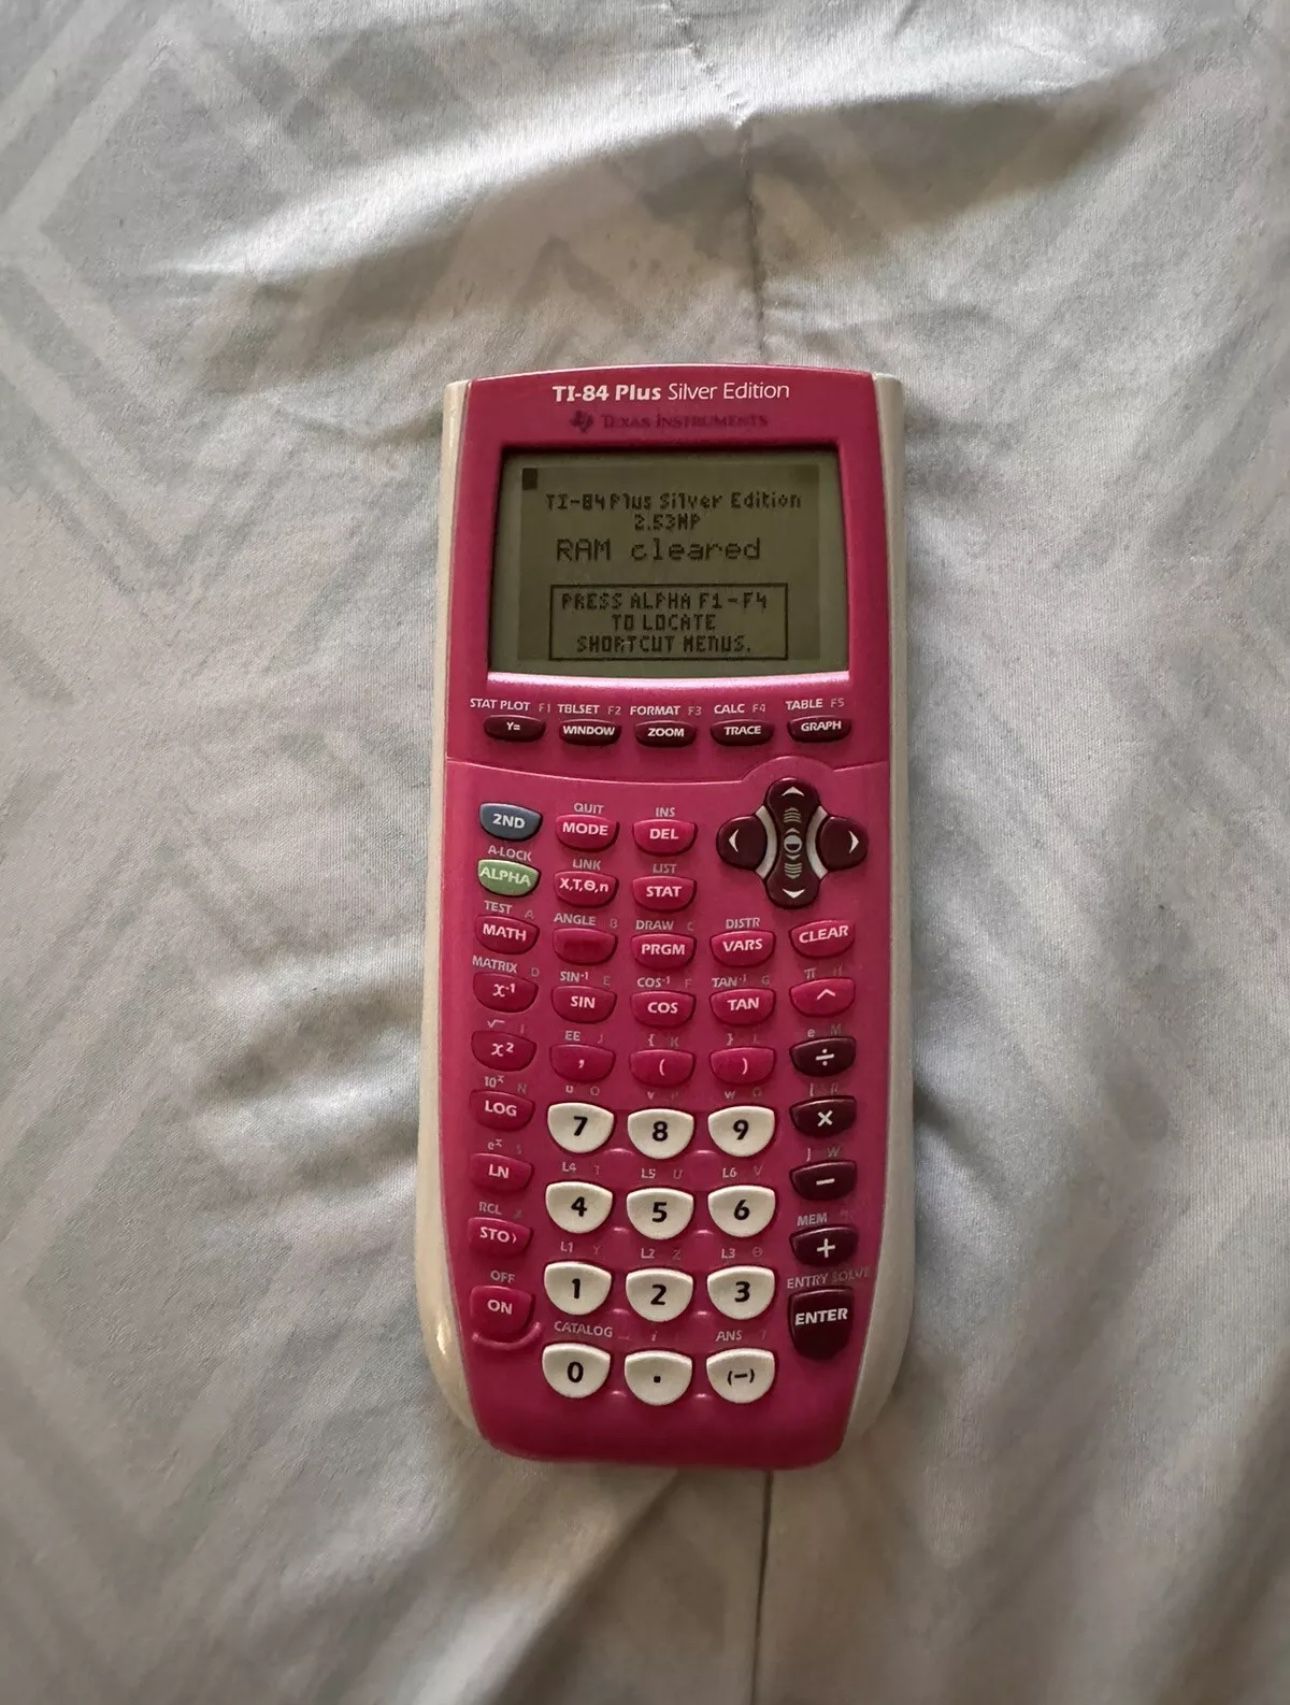 Ti-84 Plus C Silver Edition Graphing Calculator - Pink